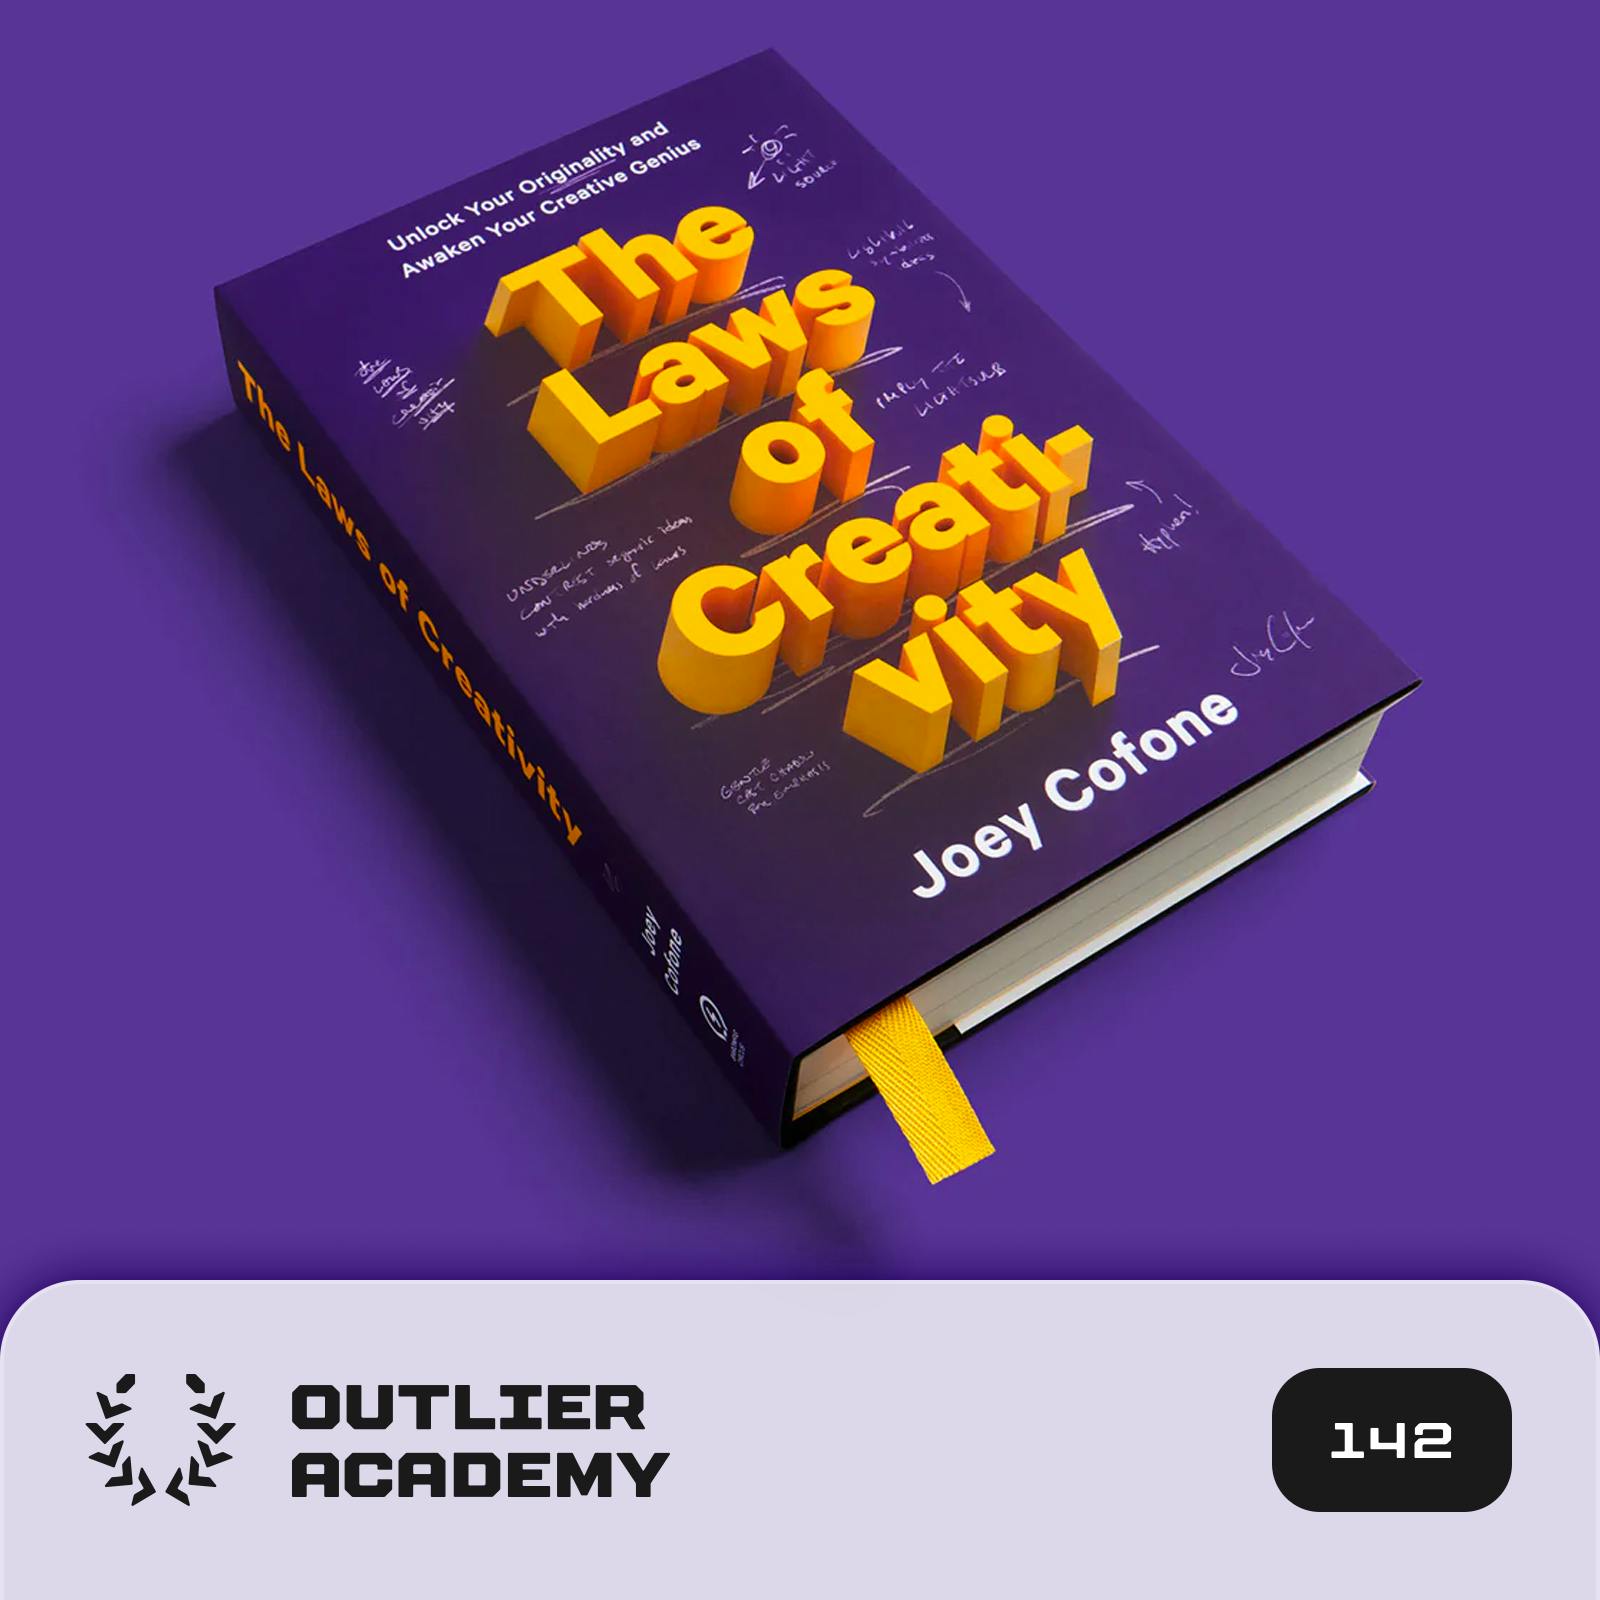 Best Books & Authors in 2022 – Joey Cofone (The Laws of Creativity: How to Unlock Your Originality and Awaken Your Creative Genius)